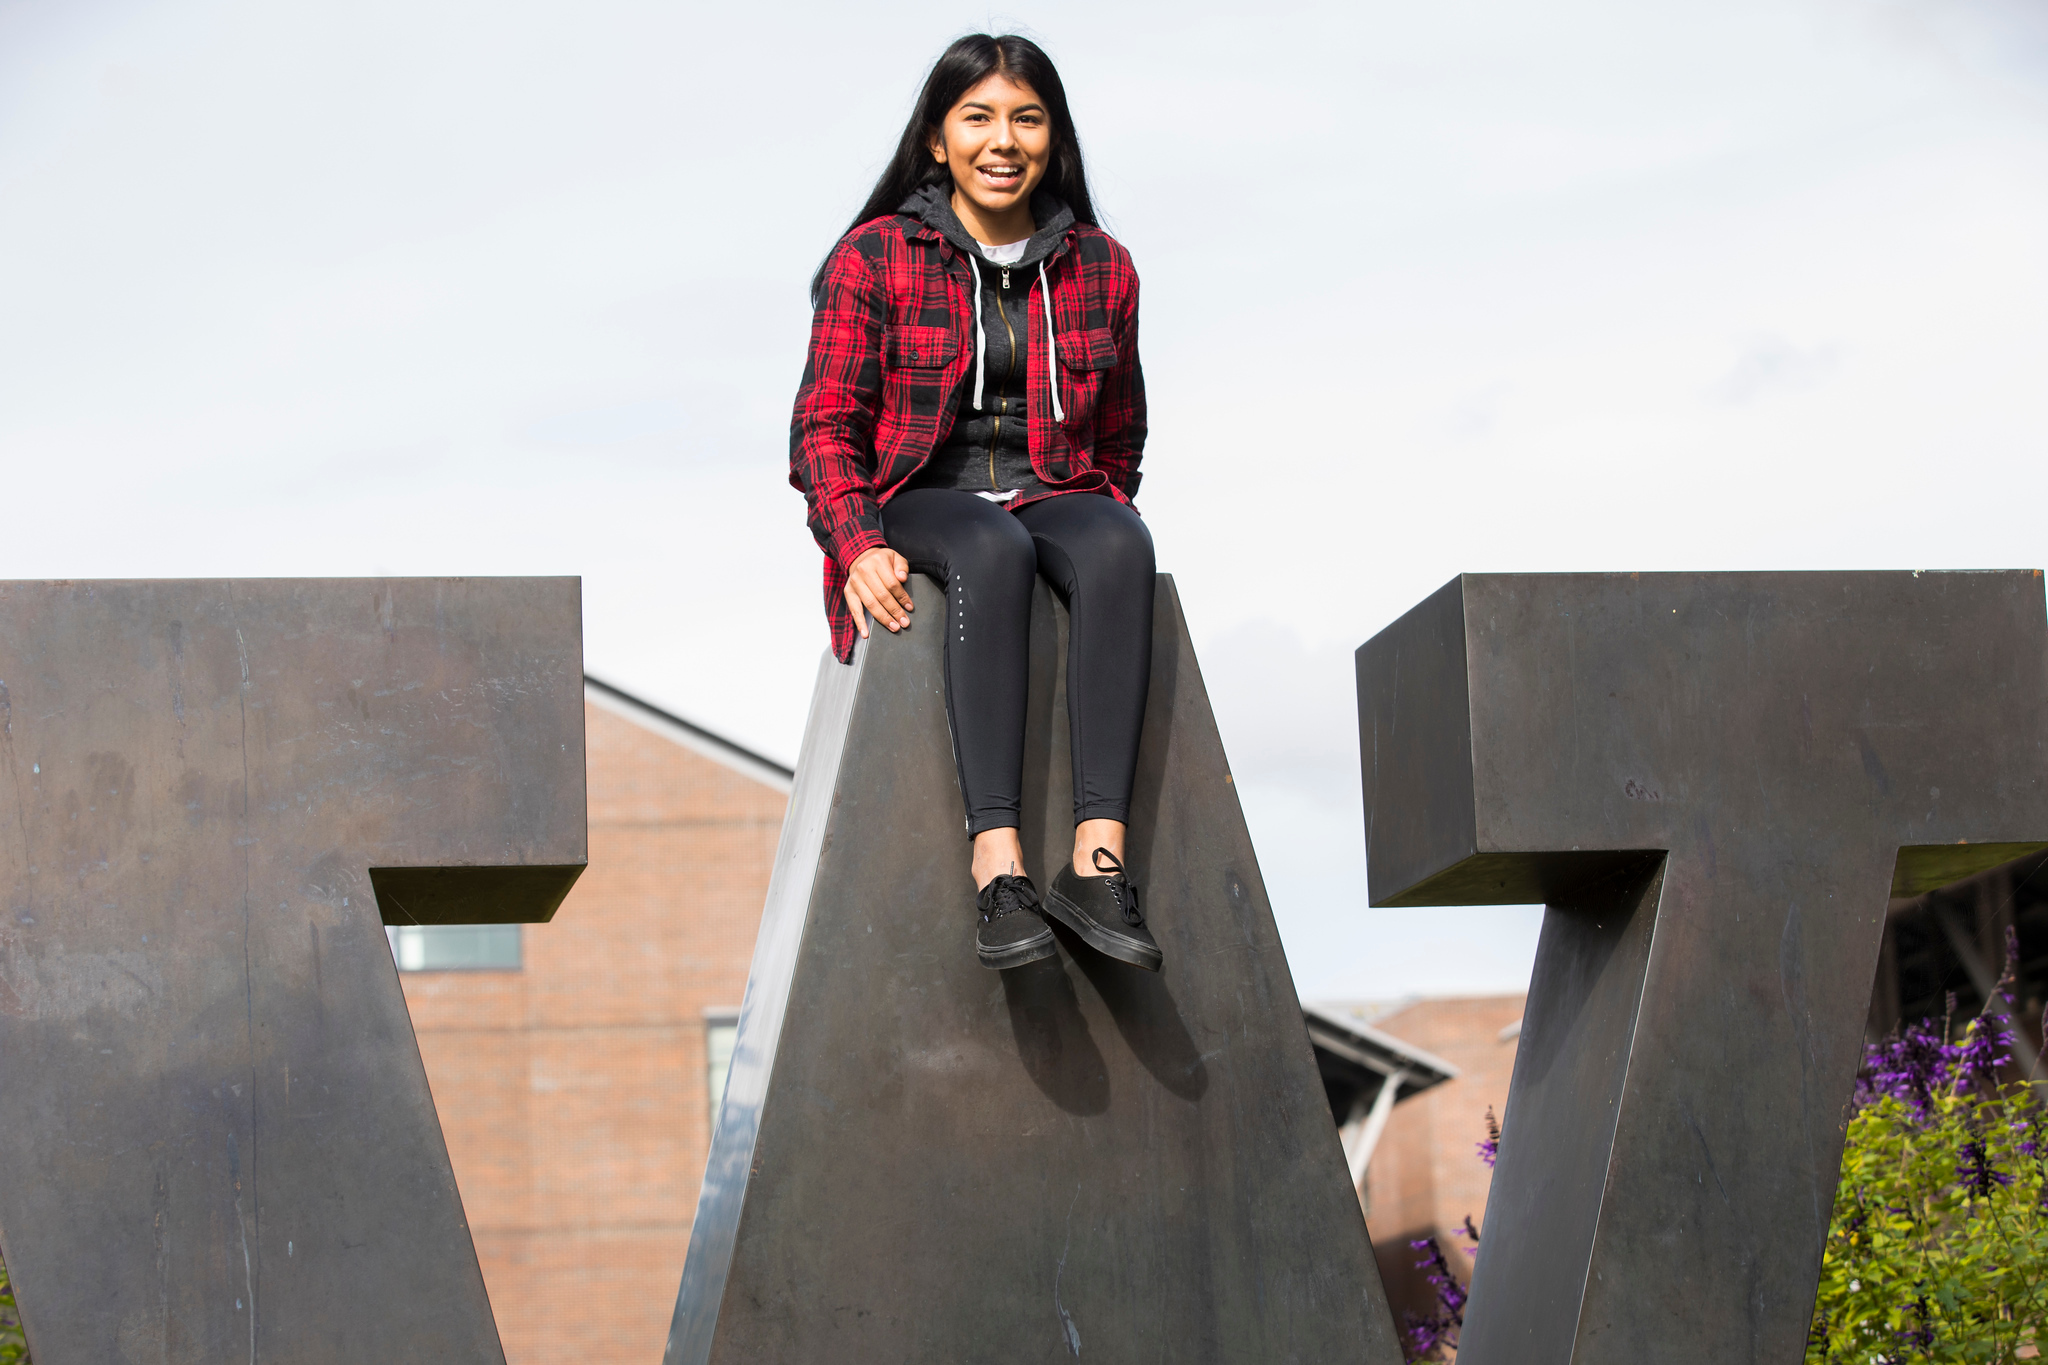 A student sits atop the UW logo